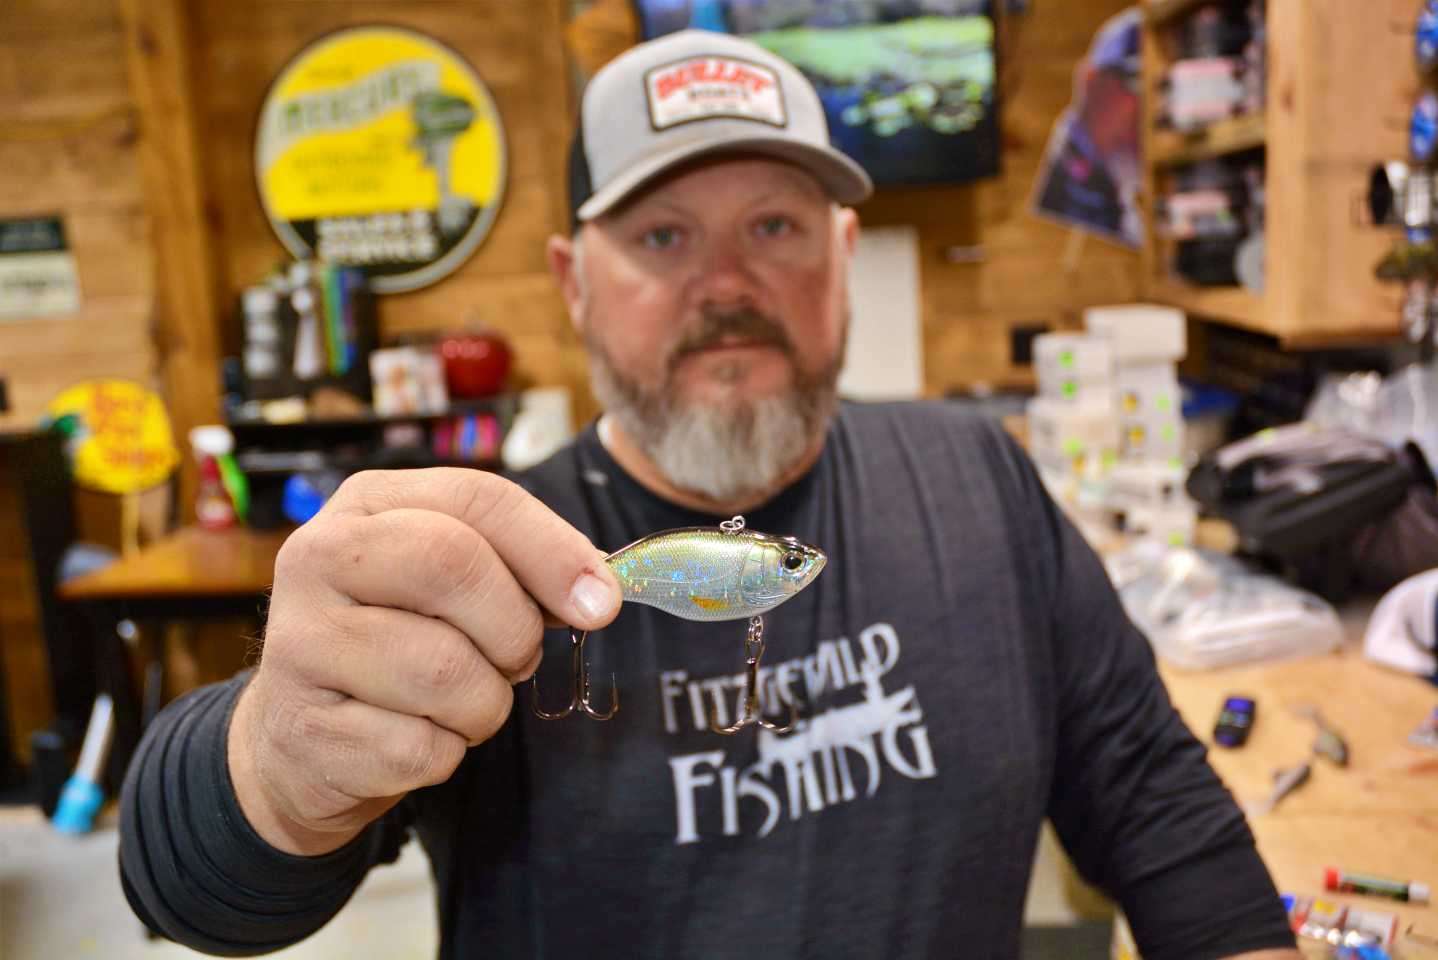 Next in the lineup is another lipless crankbait, this one in a 3/4-ounce model. âItâs got bigger hooks, which are ideal for bigger bass,â he said.  